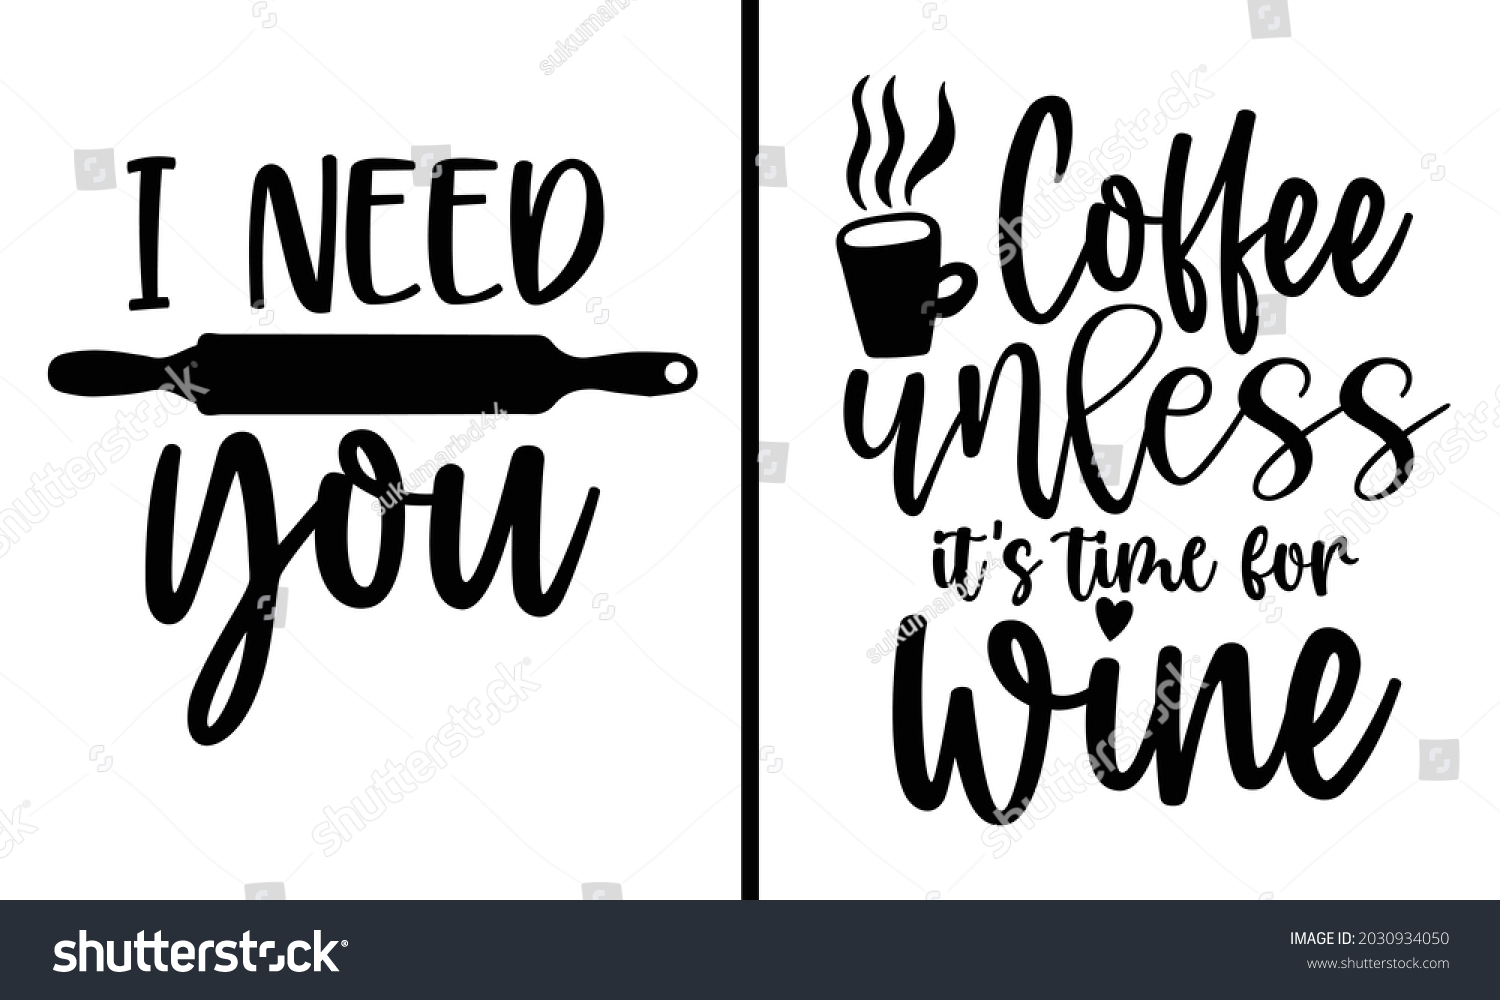 SVG of Coffee unless it’s time for wine 2 Design Bundle - Food drink t shirt design, Hand drawn lettering phrase, Calligraphy t shirt design, svg Files for Cutting Cricut and Silhouette, card, flyer svg